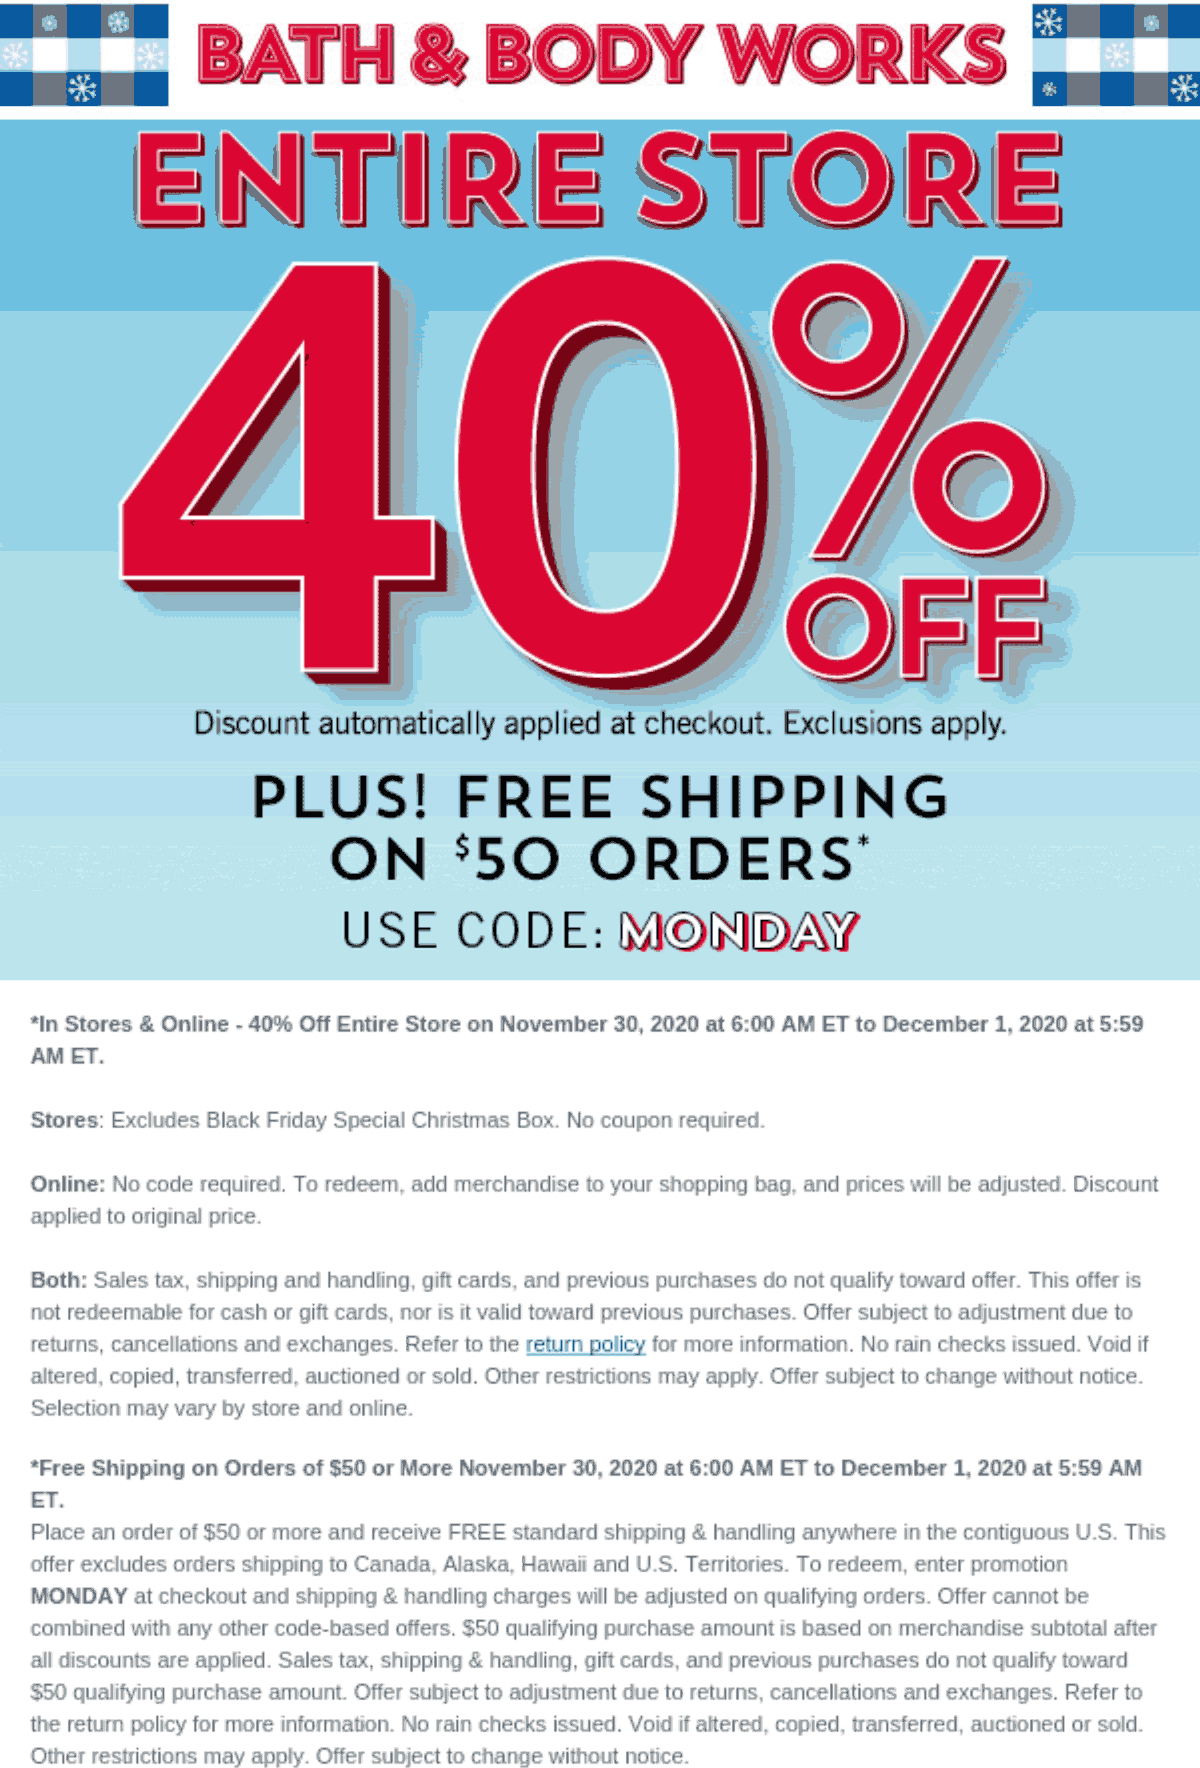 [April, 2021] 40 off everything today at Bath & Body Works via promo